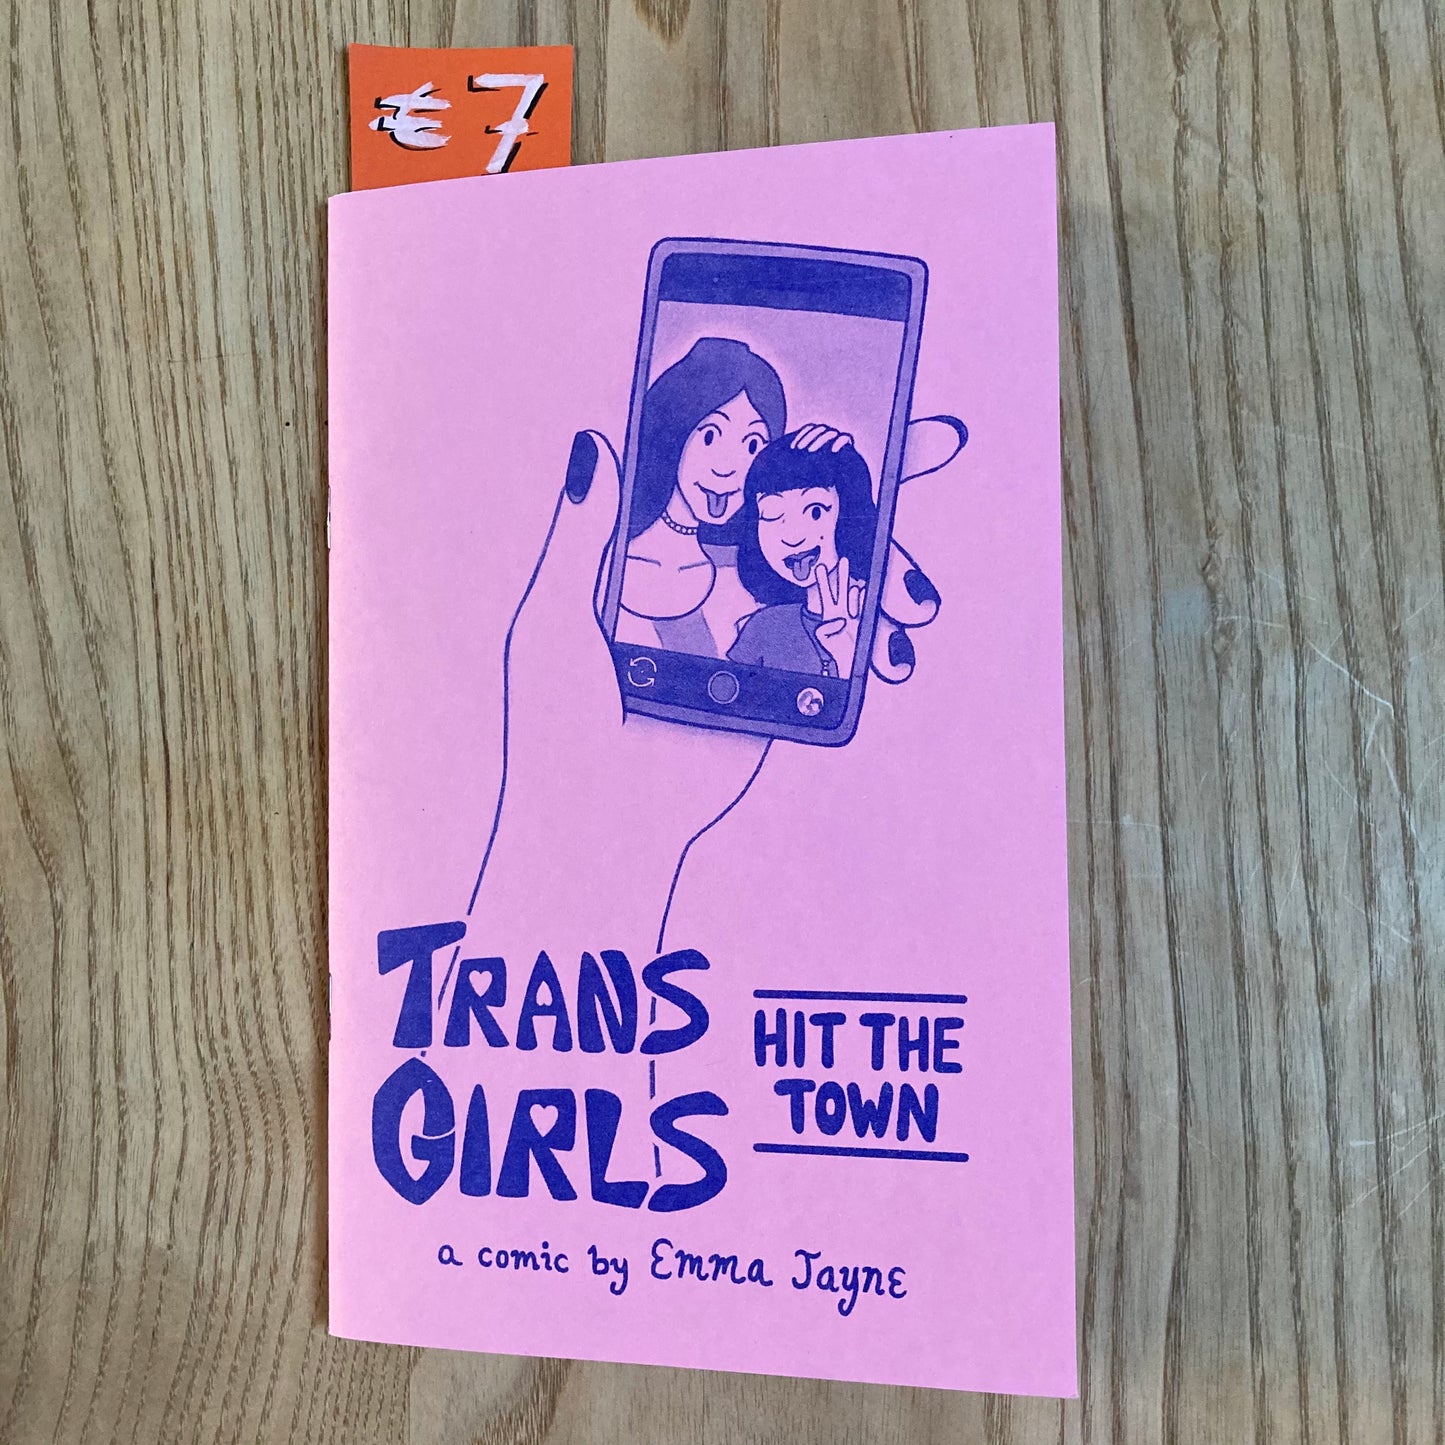 Trans Girls Hit The Town